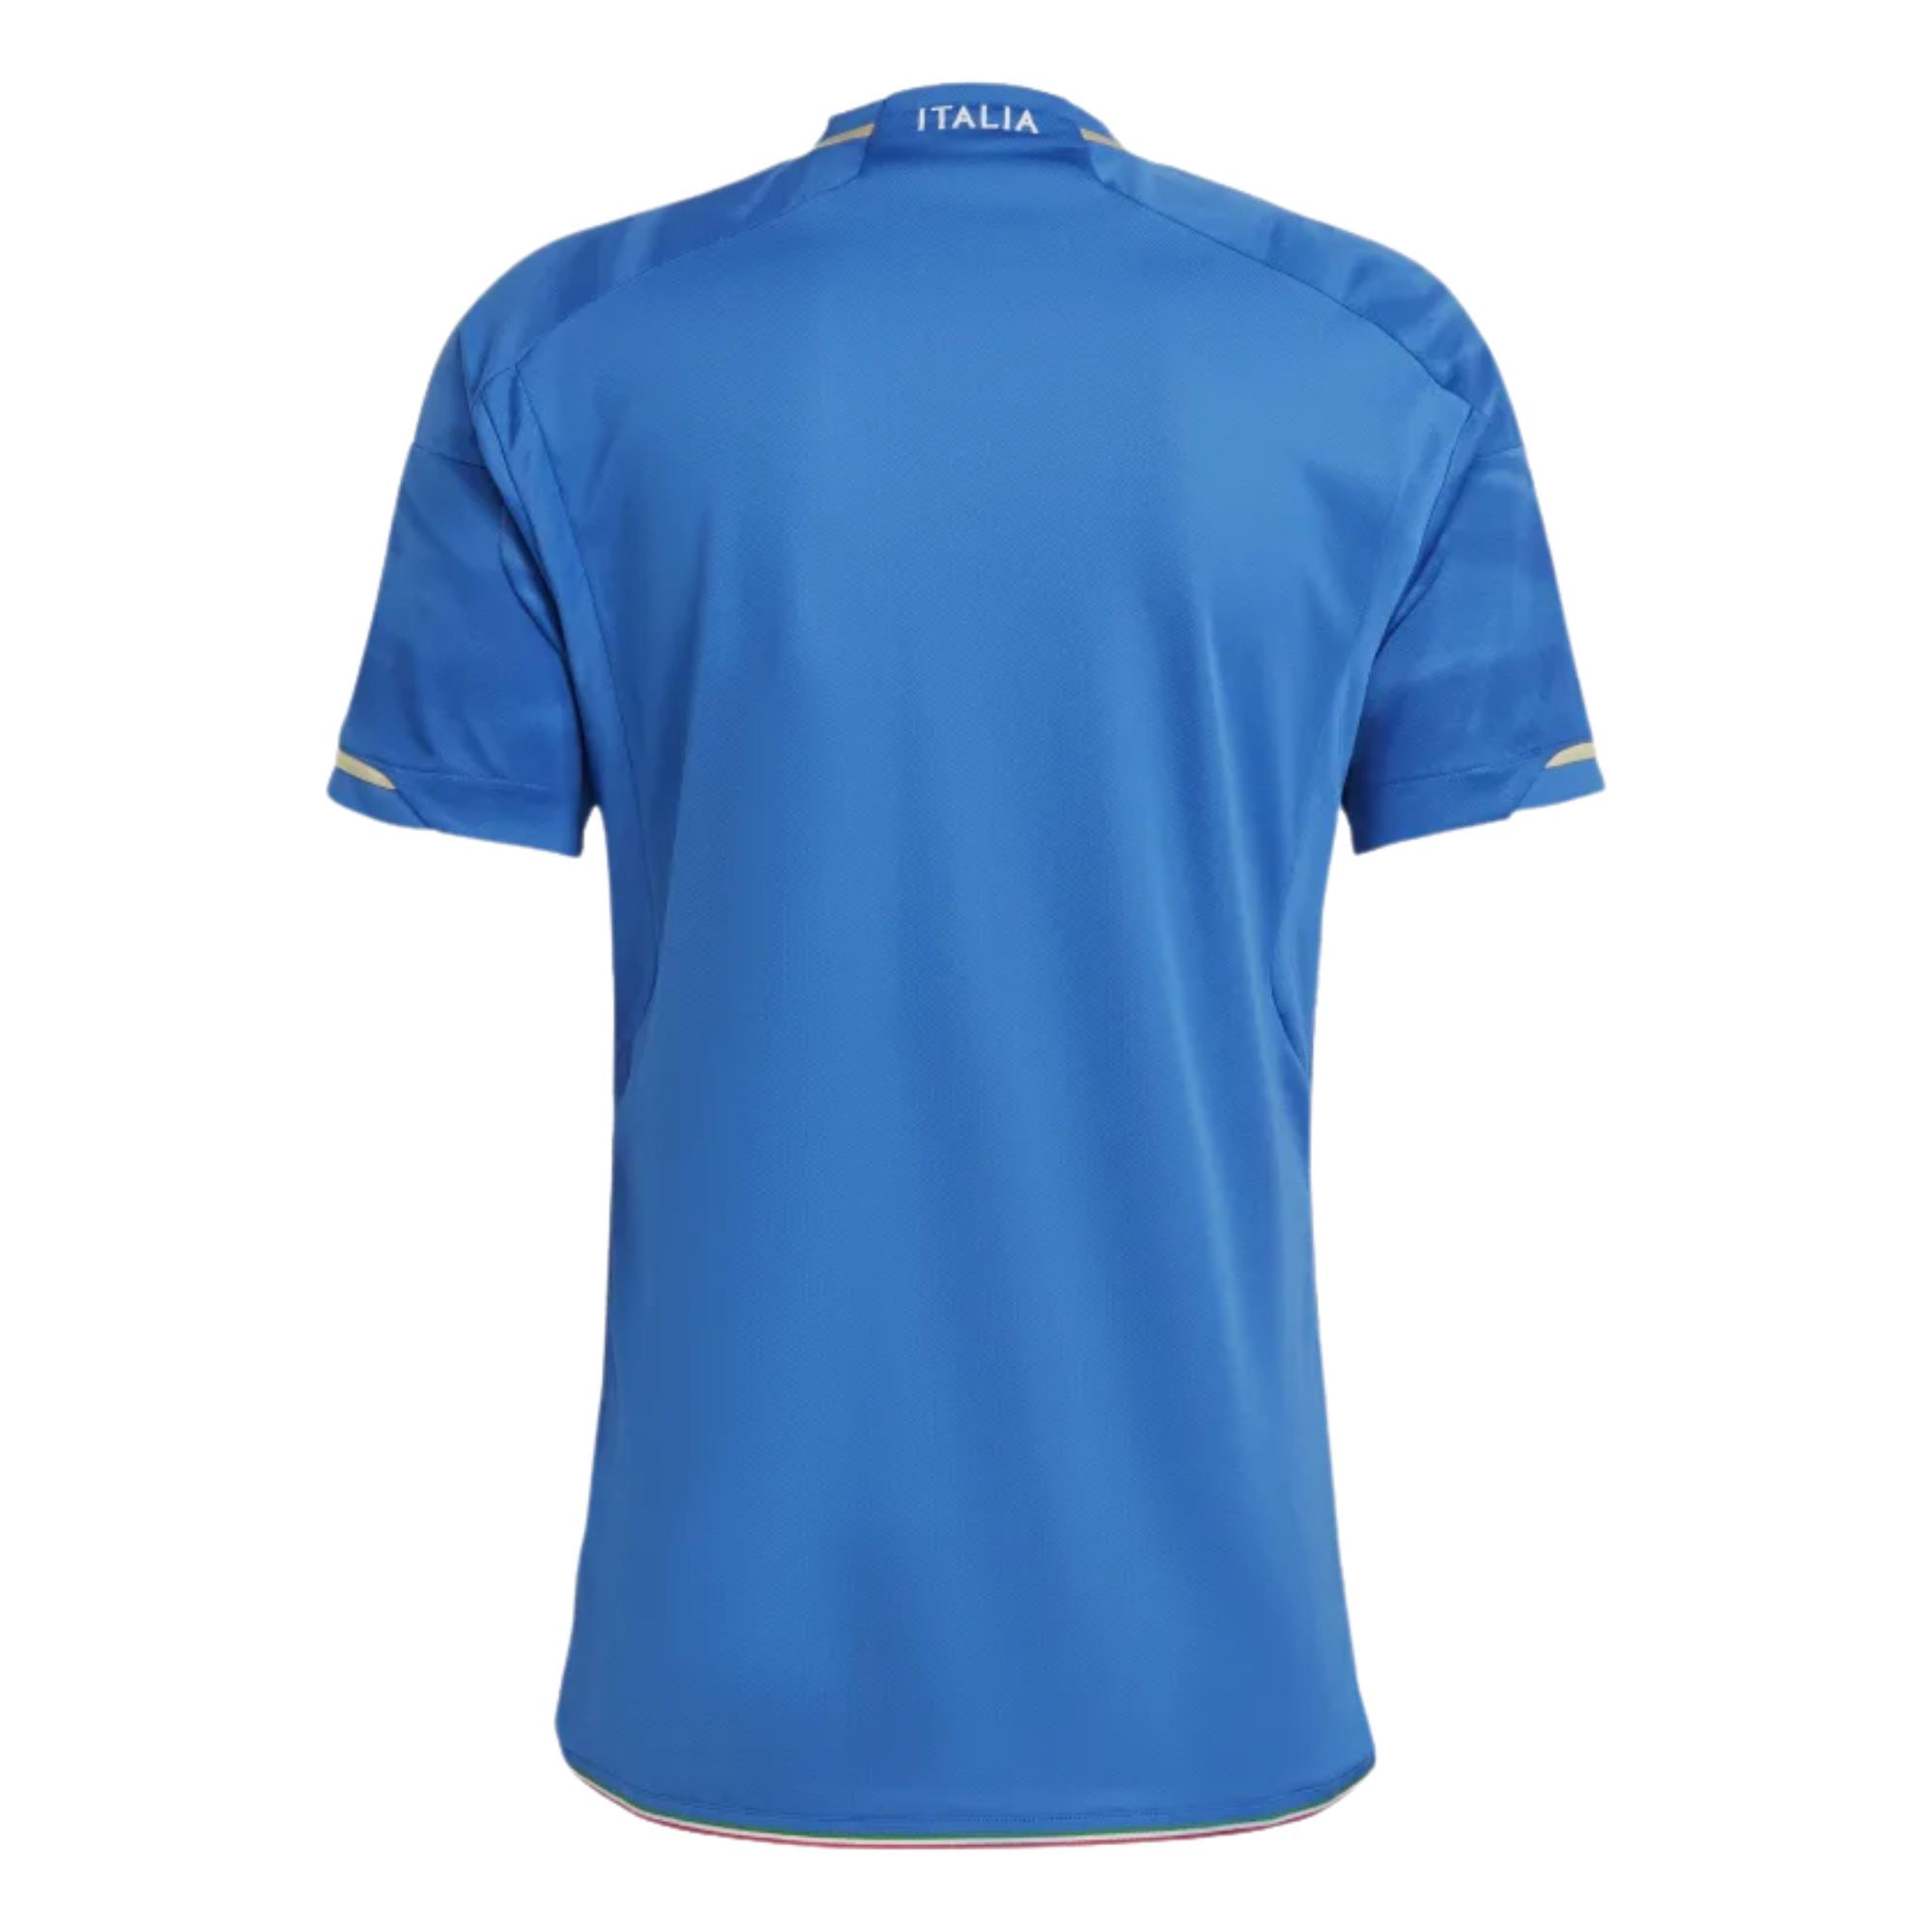 ITALY FIGC PRE-MATCH T-SHIRT 22/23